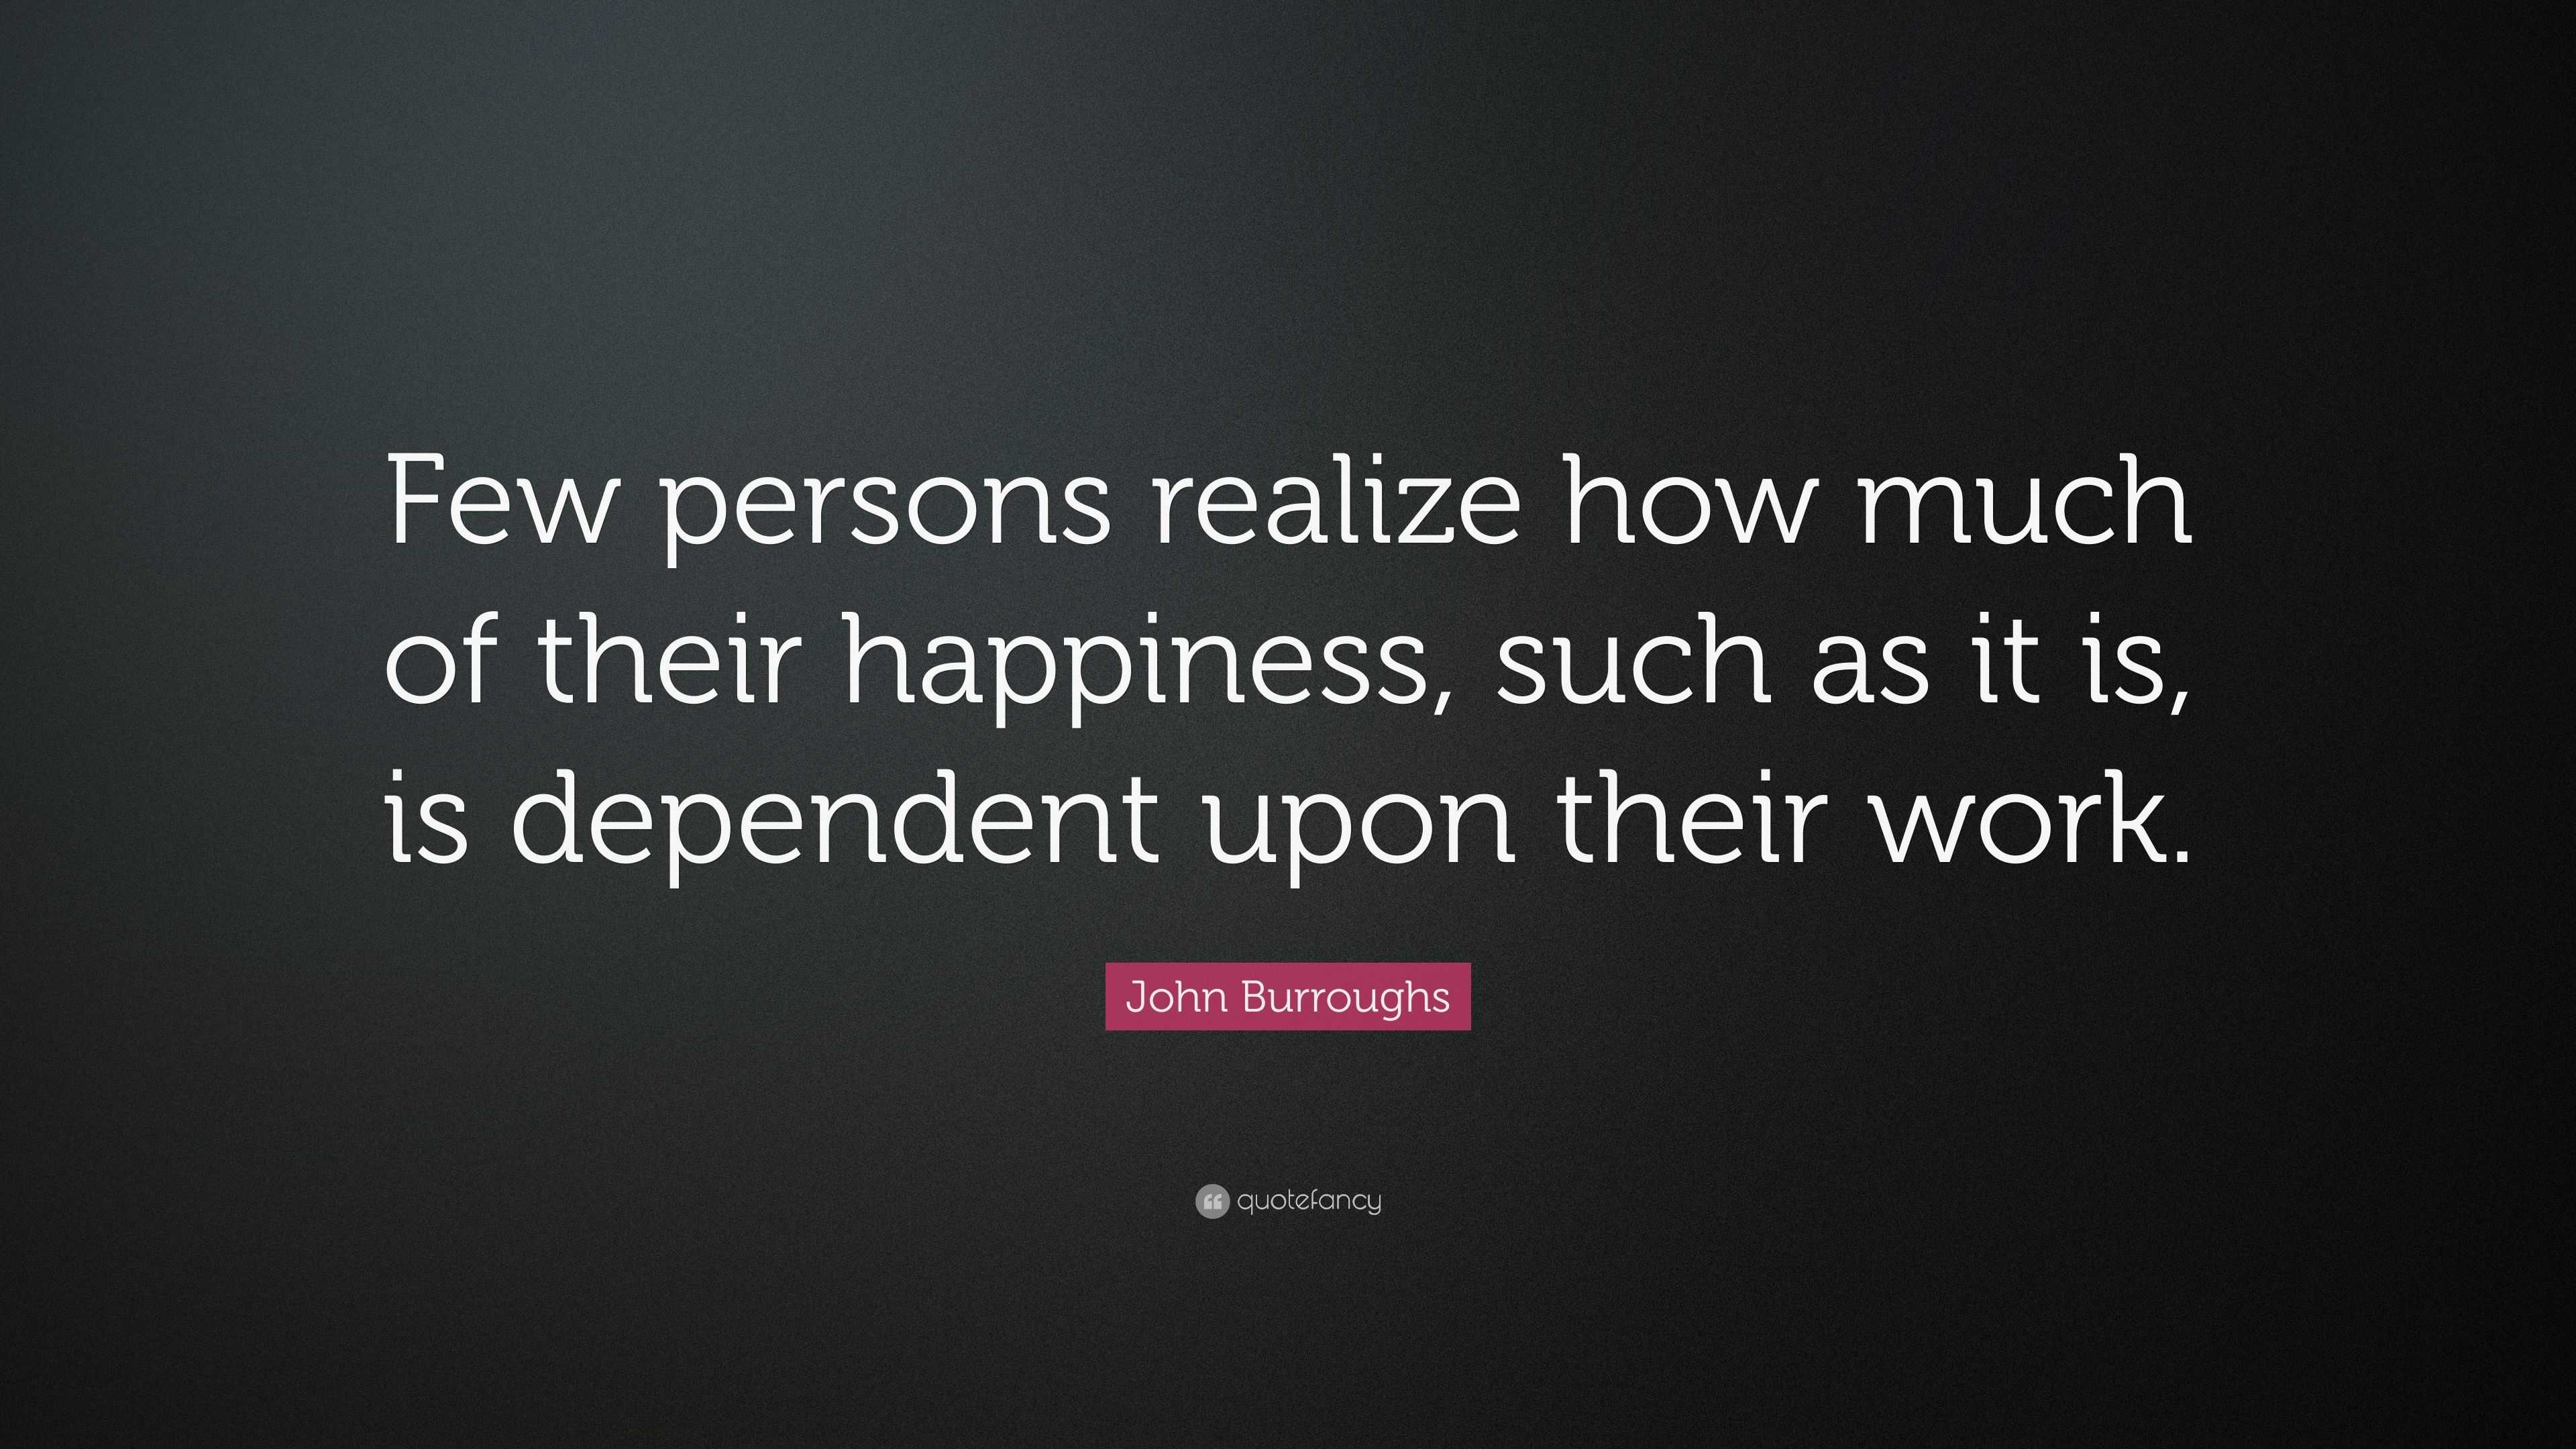 John Burroughs Quote “few Persons Realize How Much Of Their Happiness